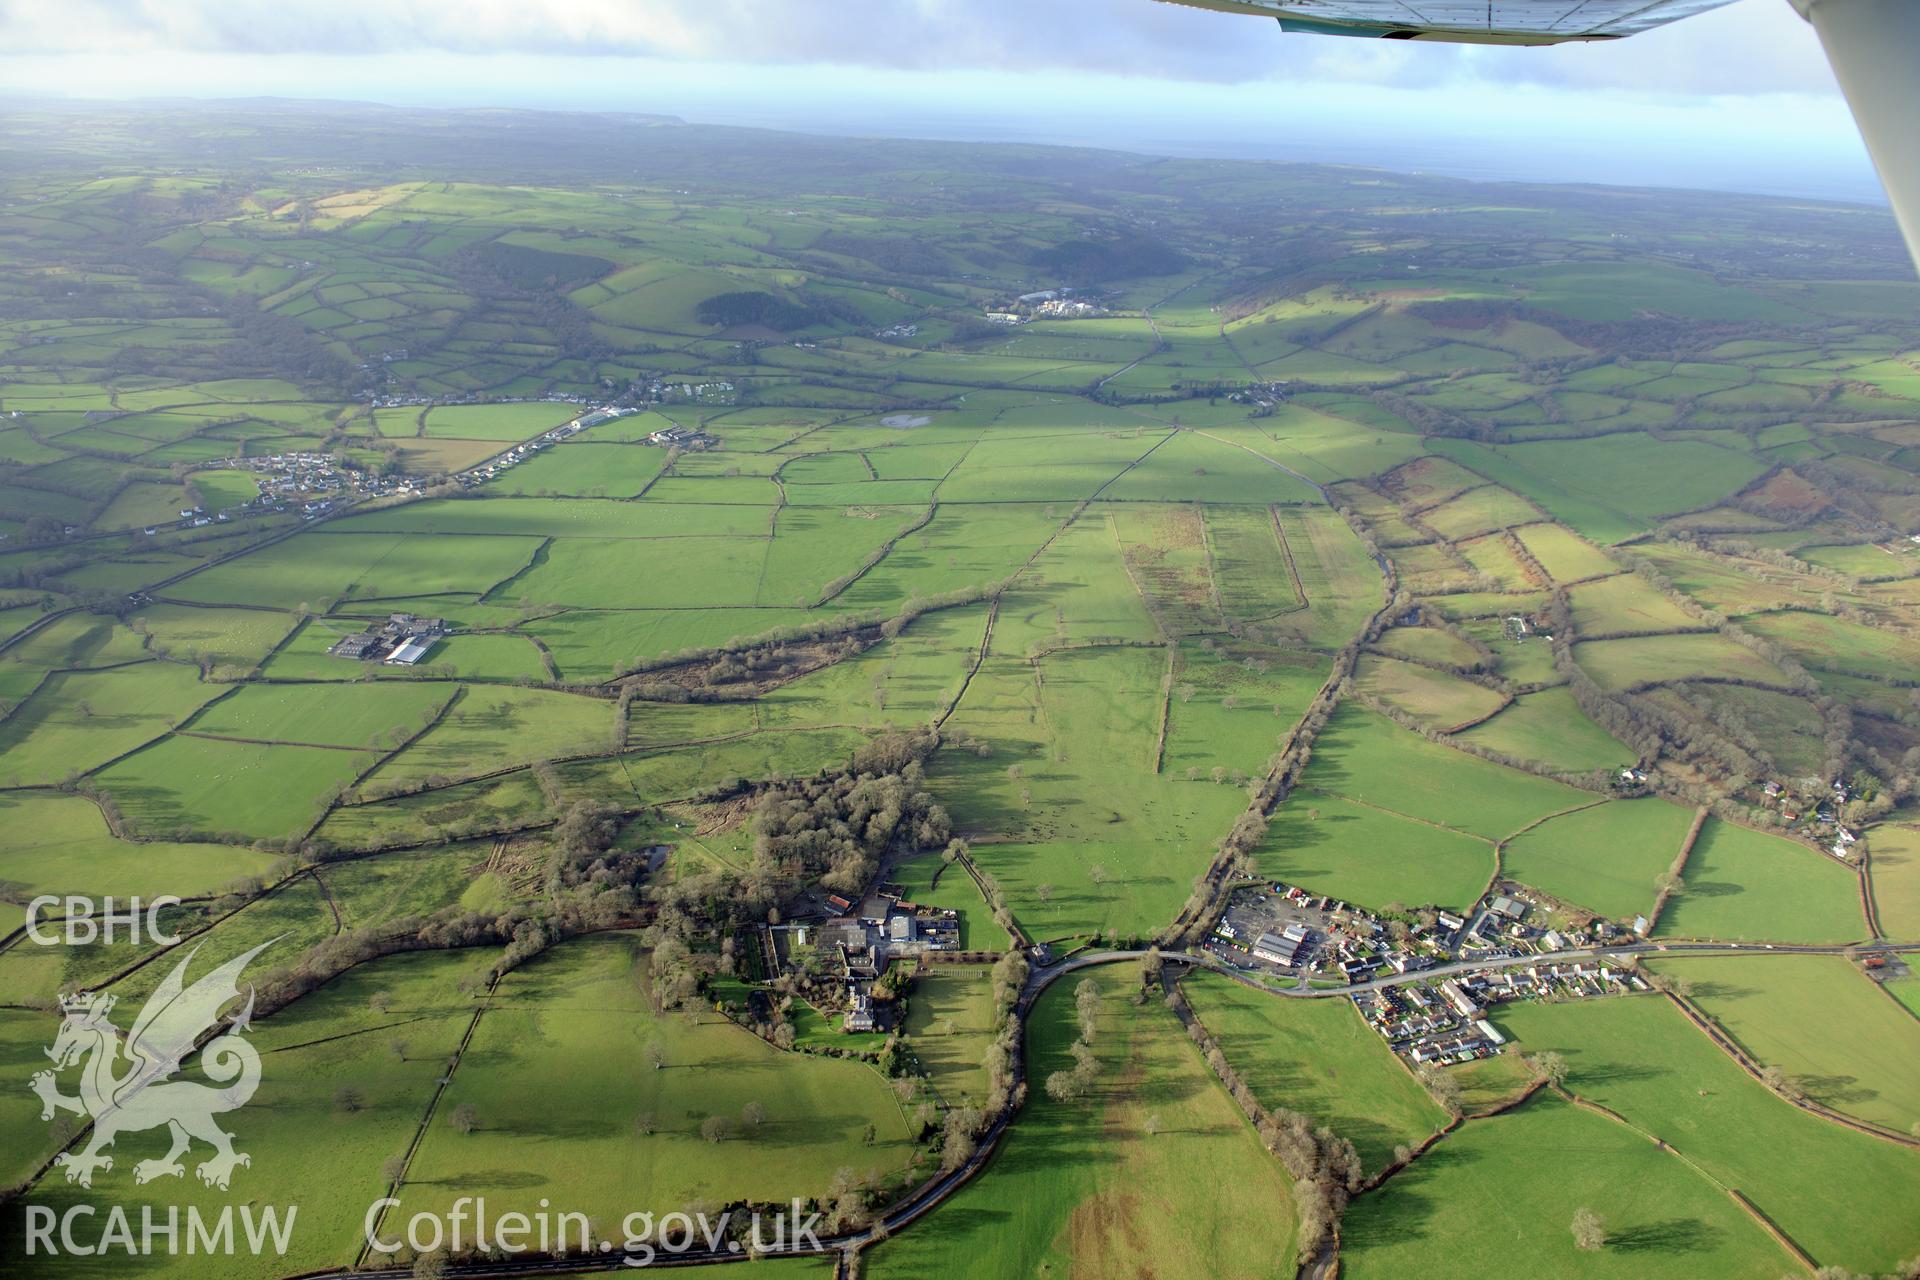 Talsarn village, and Llanllyr manison and gardens. Oblique aerial photograph taken during the Royal Commission's programme of archaeological aerial reconnaissance by Toby Driver on 6th January 2015.